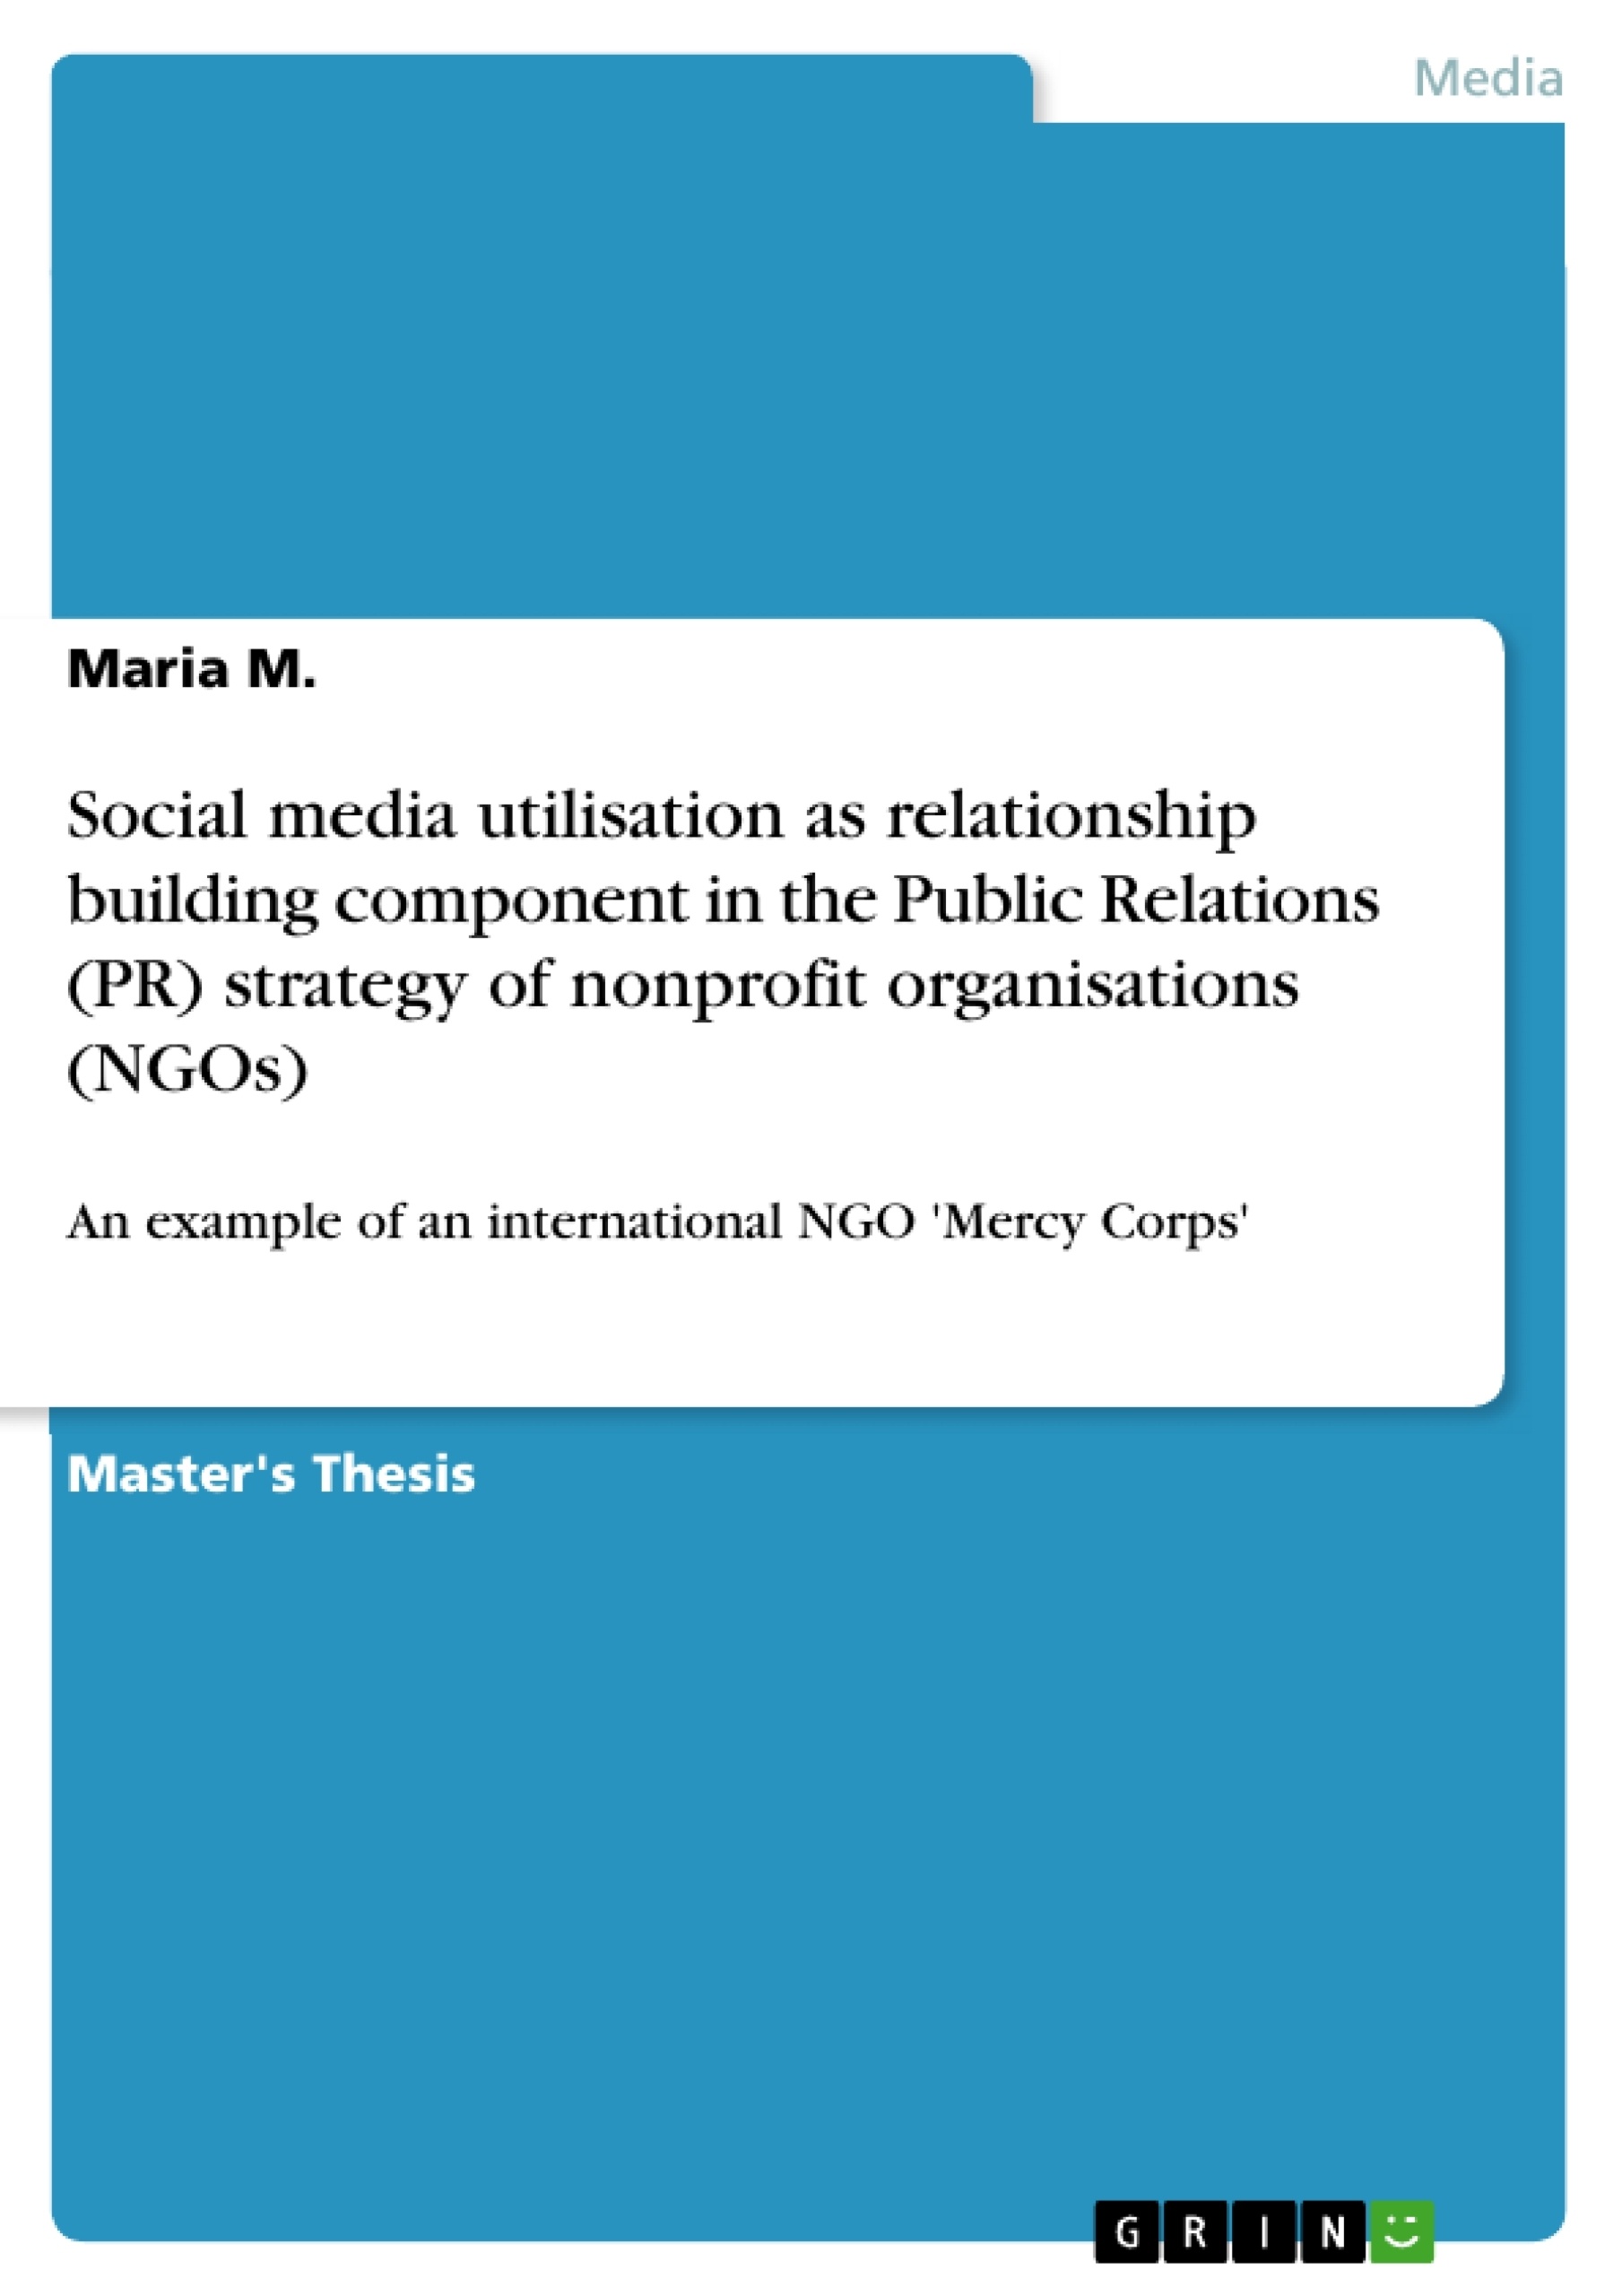 Title: Social media utilisation as relationship building component in the Public Relations (PR) strategy of nonprofit organisations (NGOs)